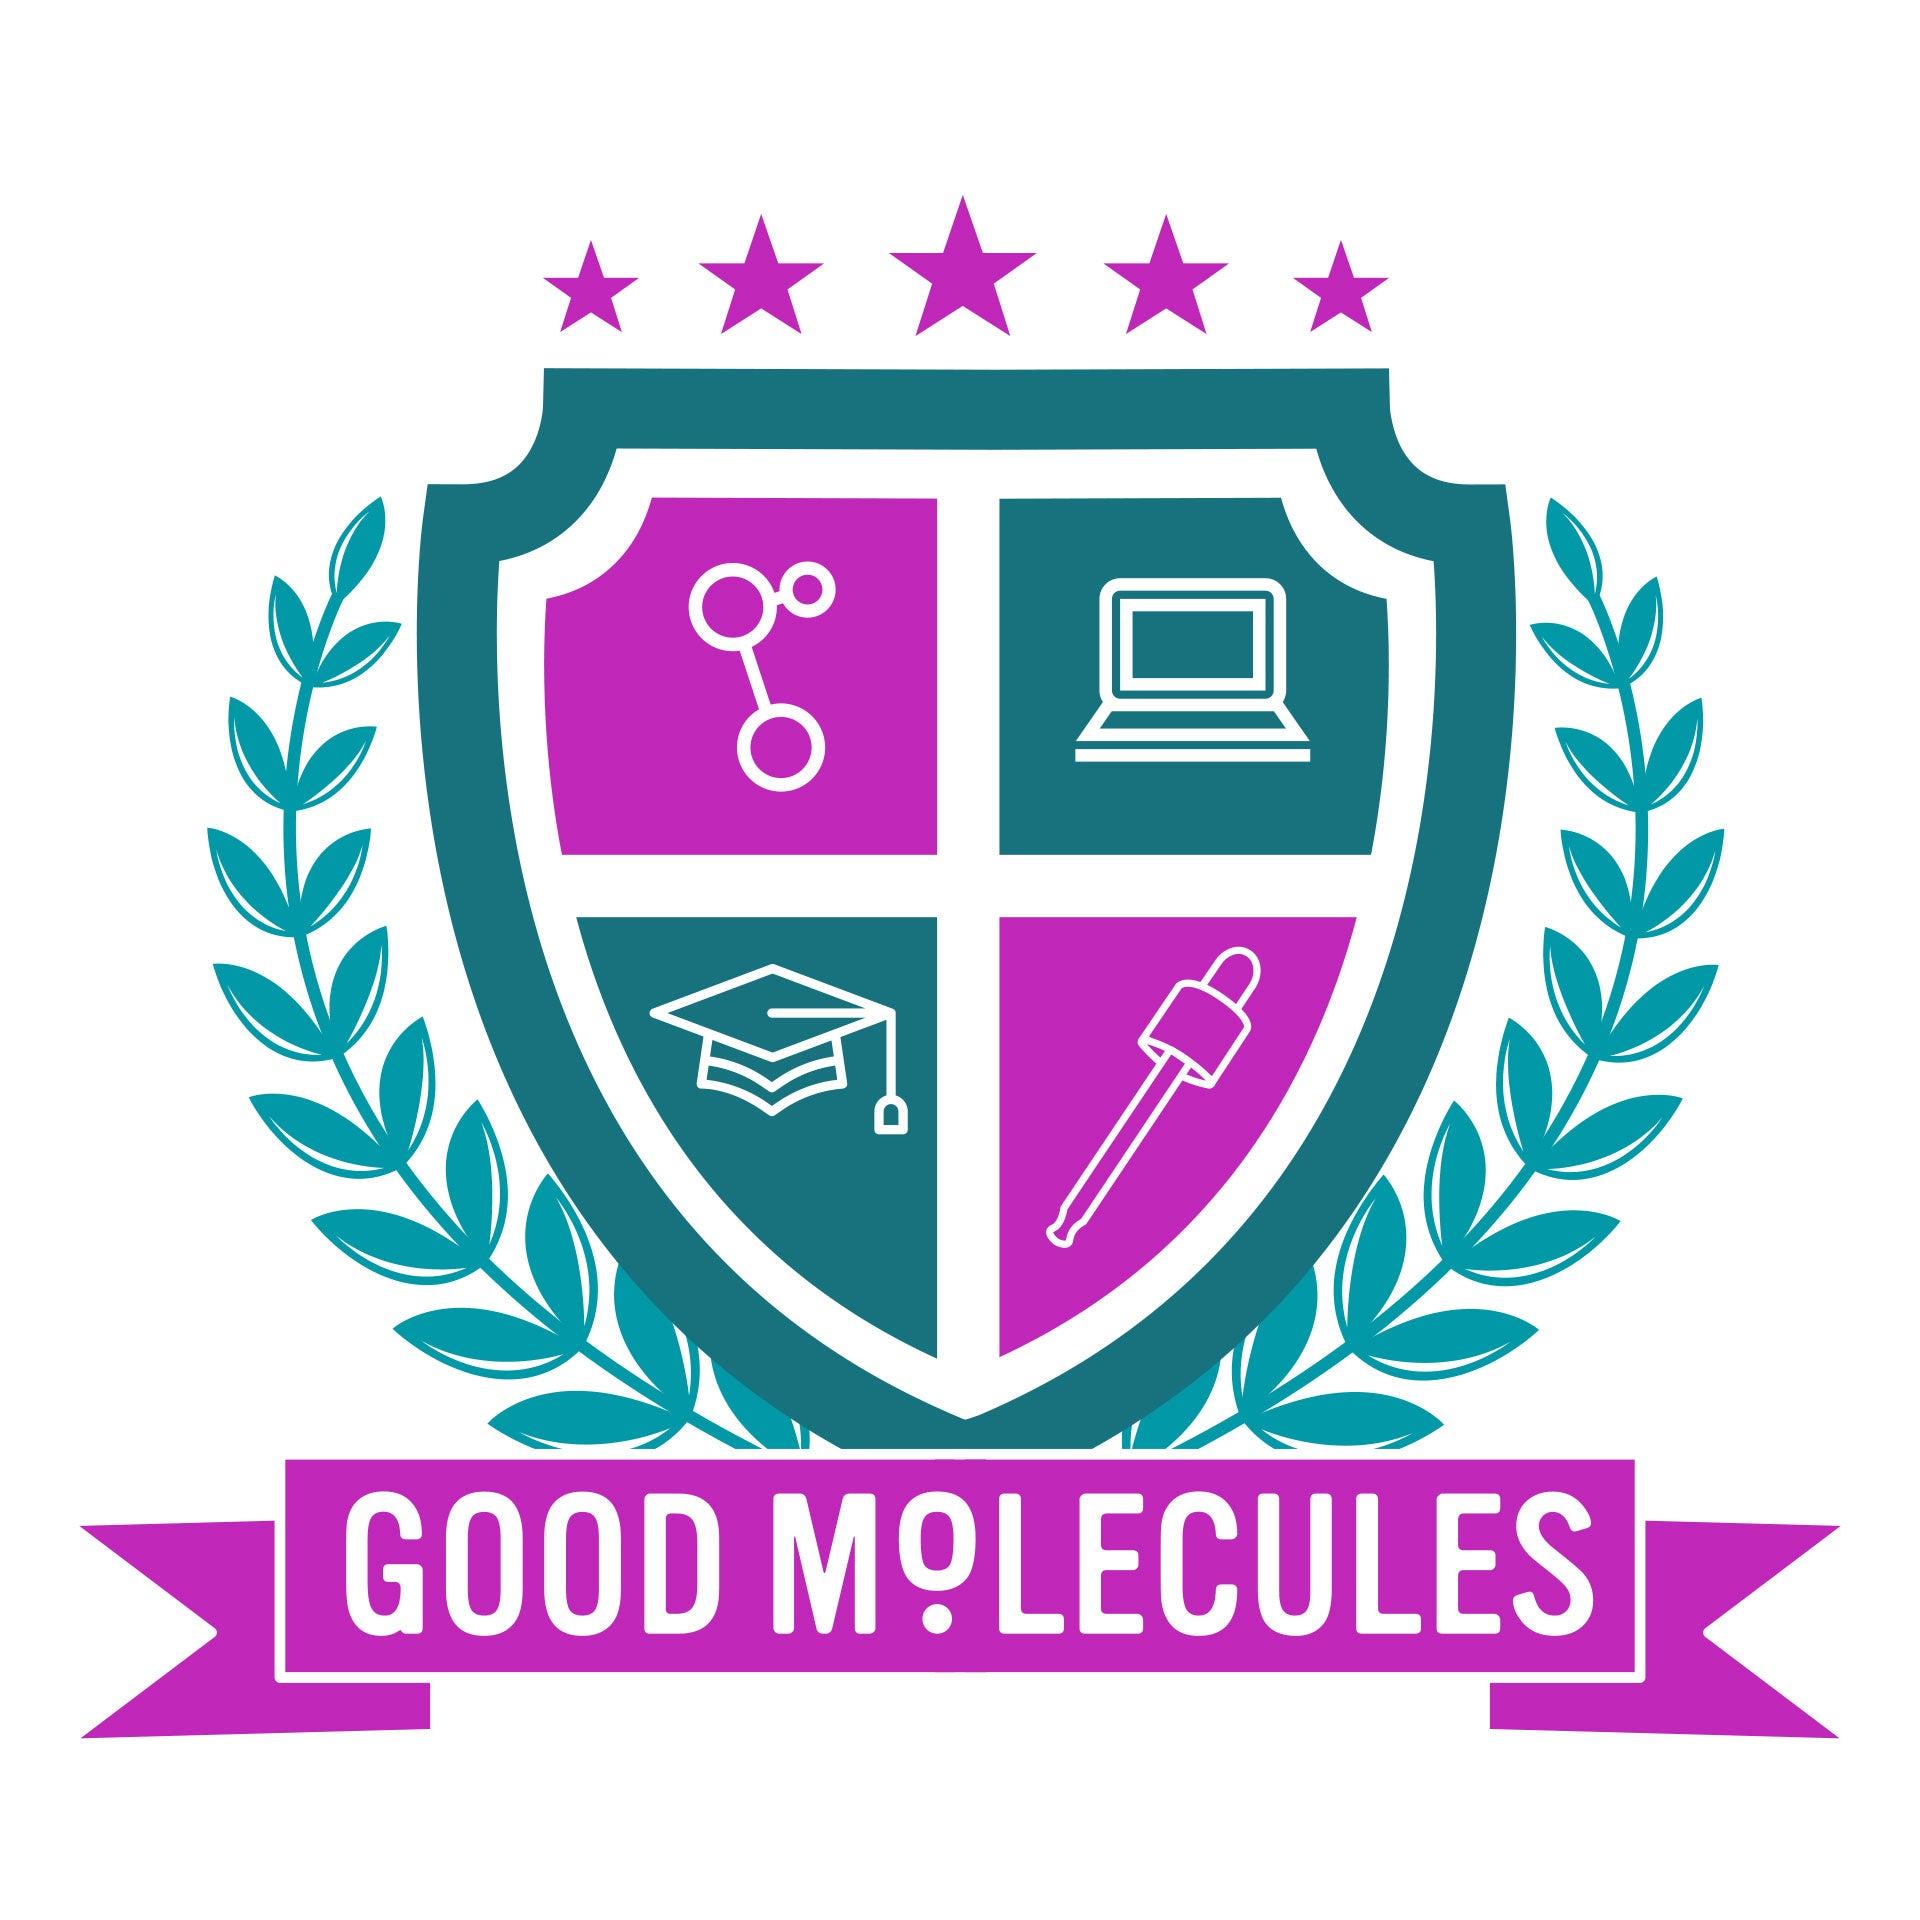 Good Molecules is coming to Louisiana State University!